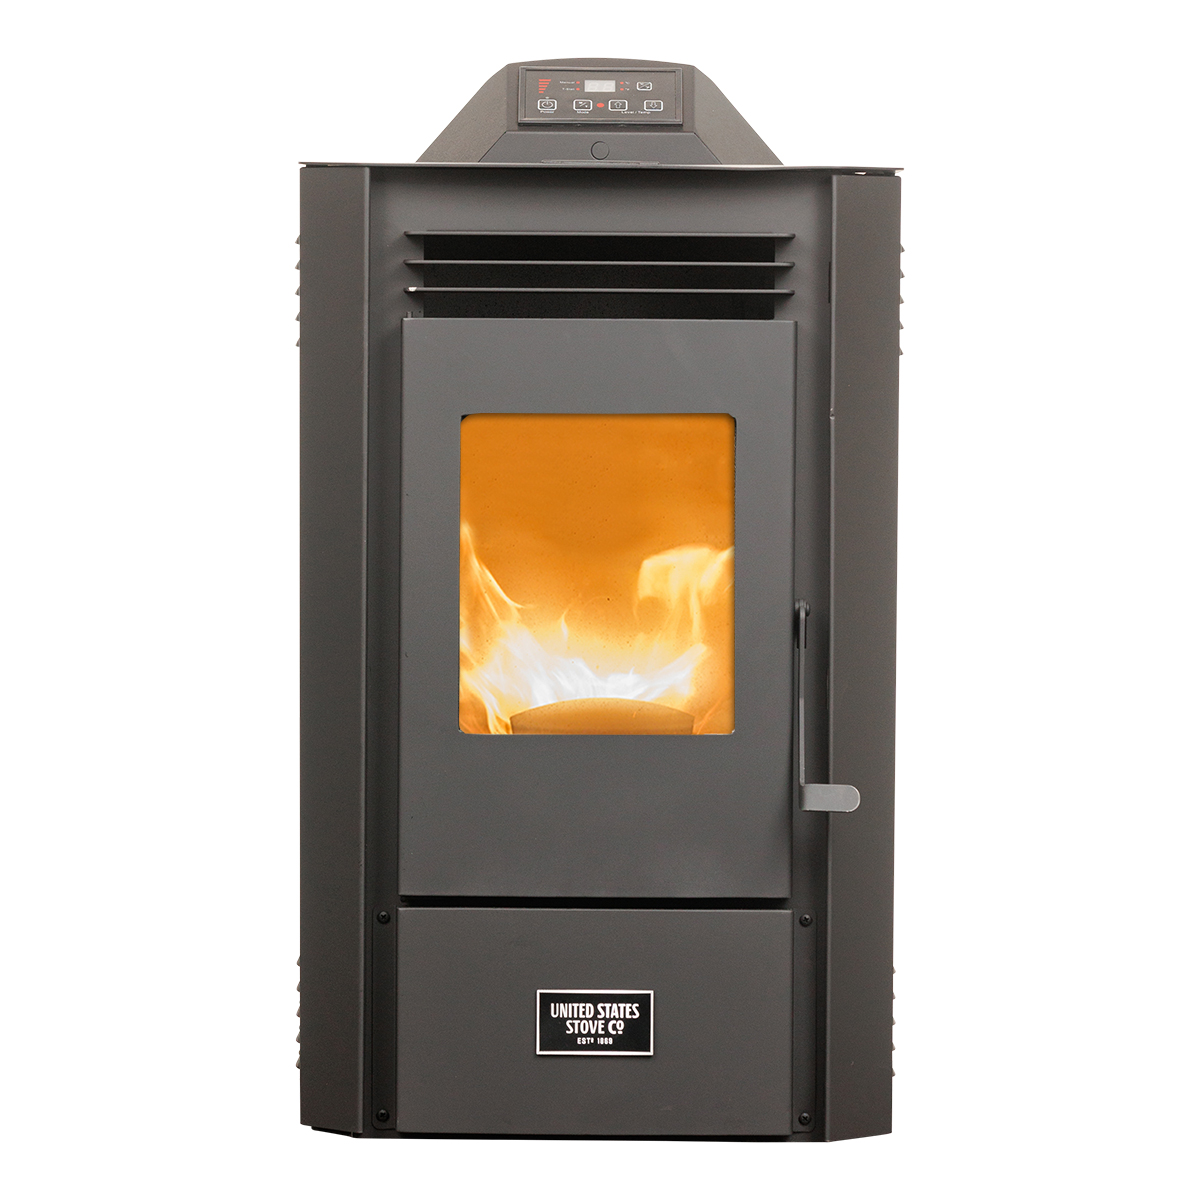 What Are the Benefits of Using a Log Burner Fan? - Direct Stoves